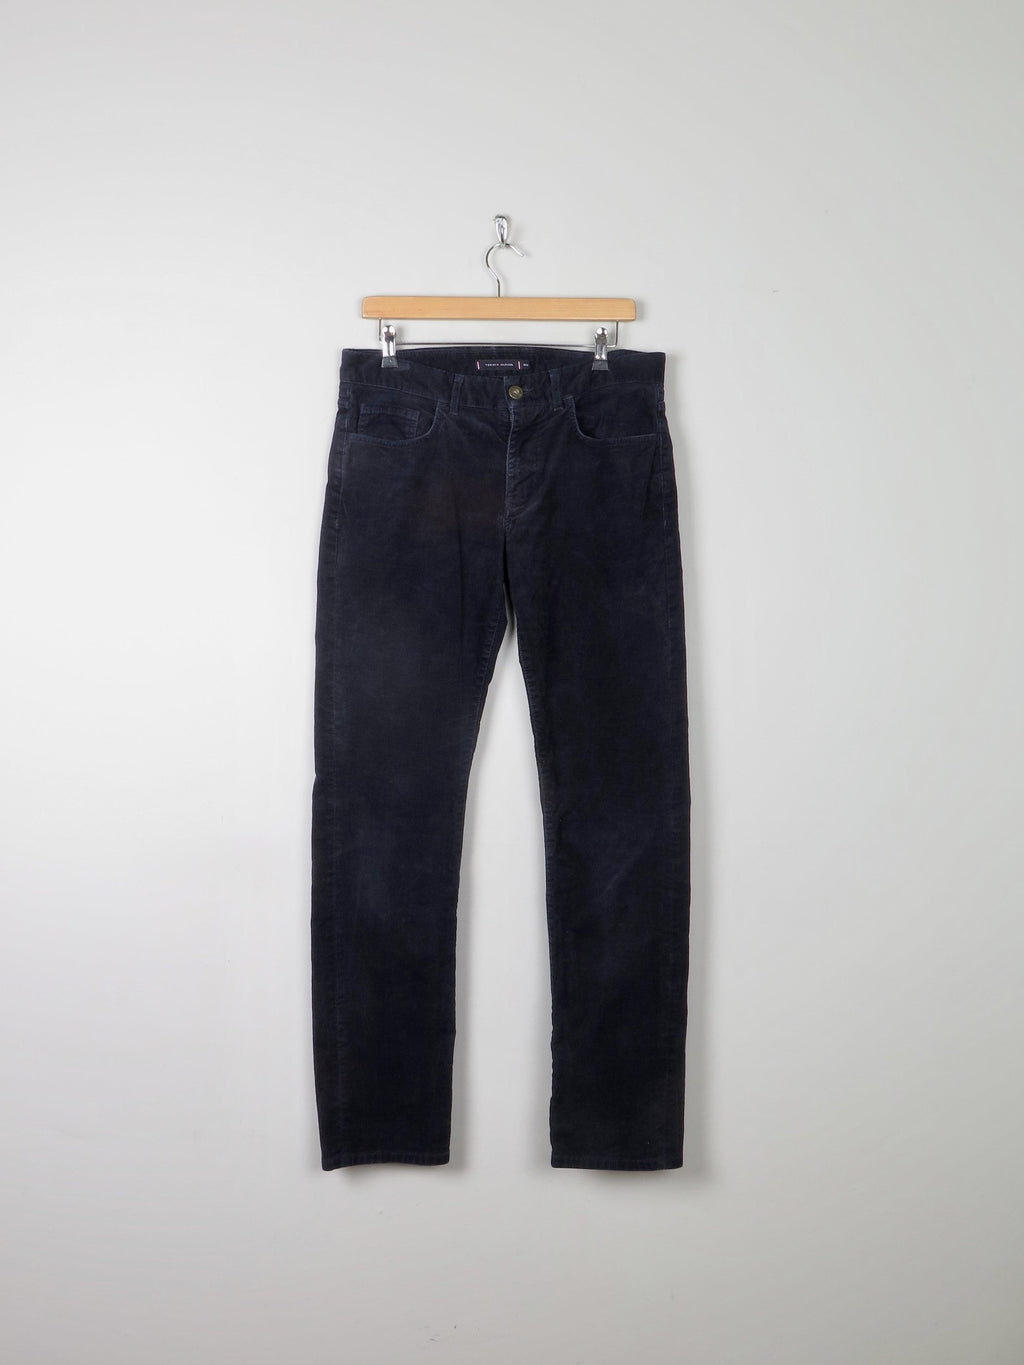 Tommy Hilfiger Navy Cord Jeans Straight Leg 32/32 - The Harlequin